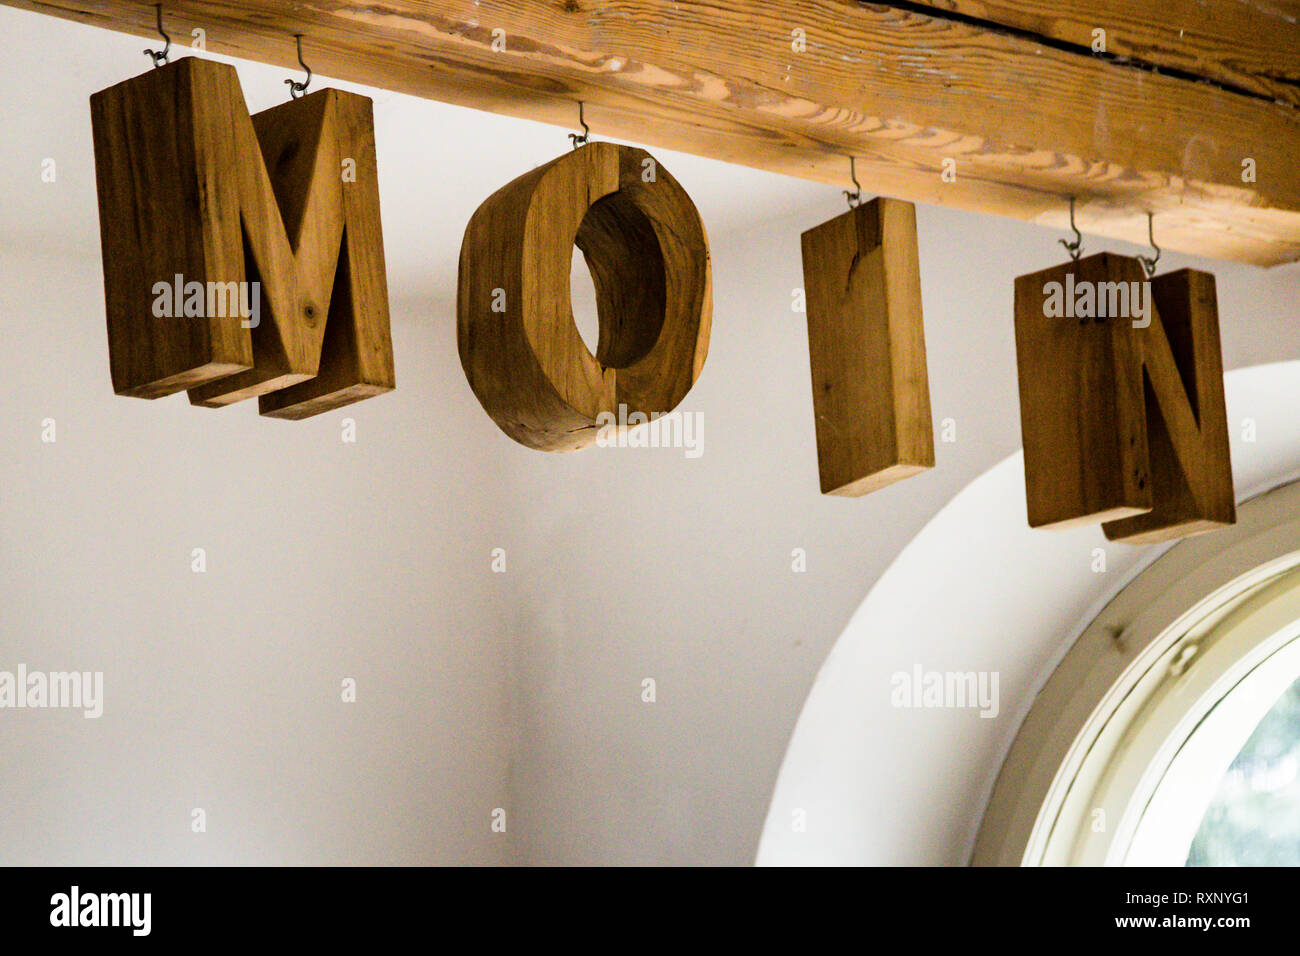 Moin! The North German greeting hangs in large letters on a wooden beam in Hotel Kavaliershaus in Fincken, Germany Stock Photo